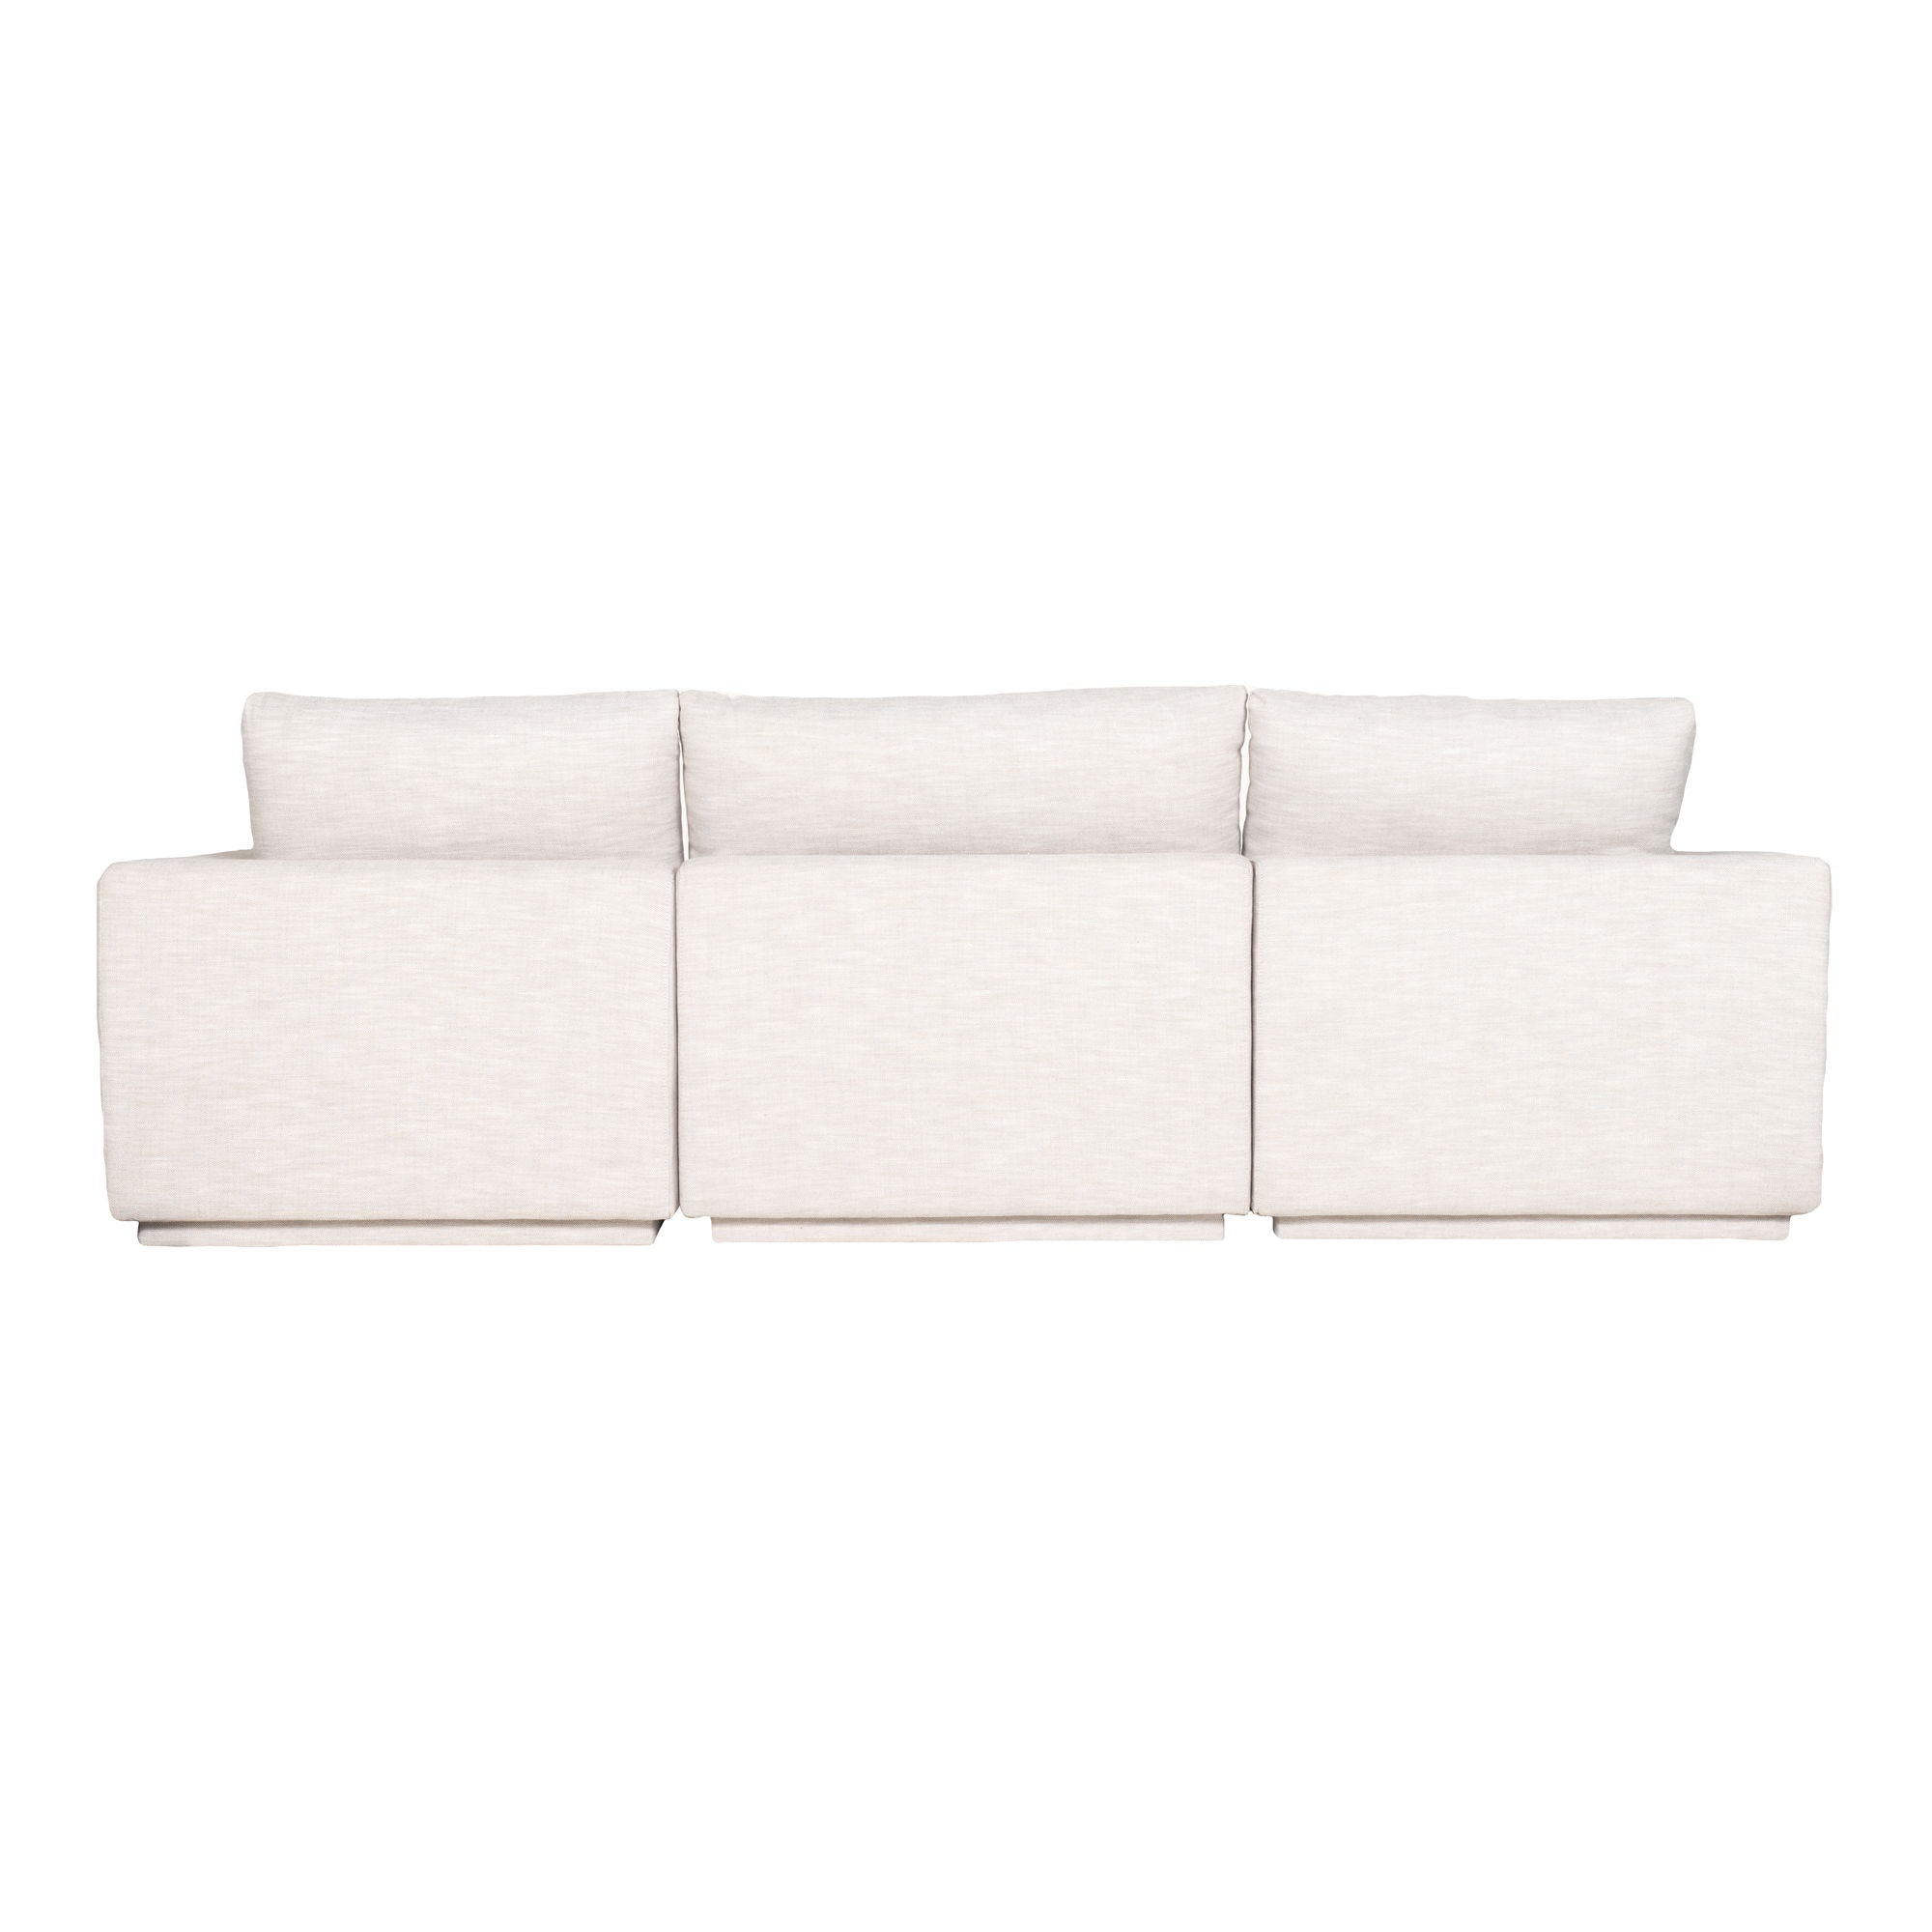 Moe's Justin L Modular Sectional - Taupe - Comfy & Stylish-Stationary Sectionals-American Furniture Outlet